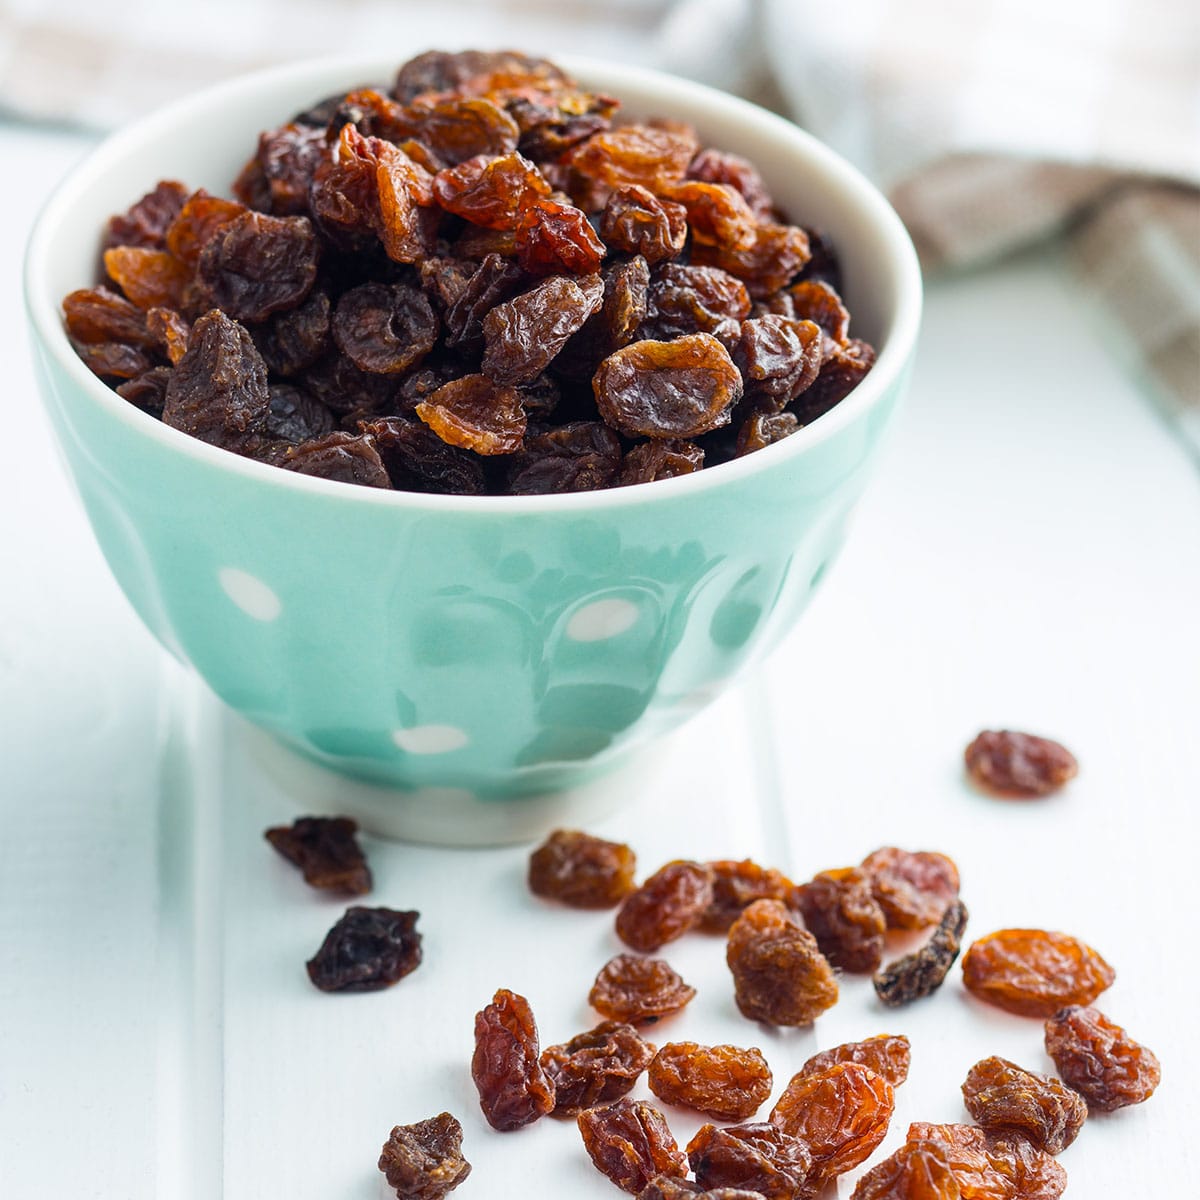 Freezing raisins is a great way to keep them fresh and ready to use when you need them. The best way to freeze raisins is by using an airtight container.